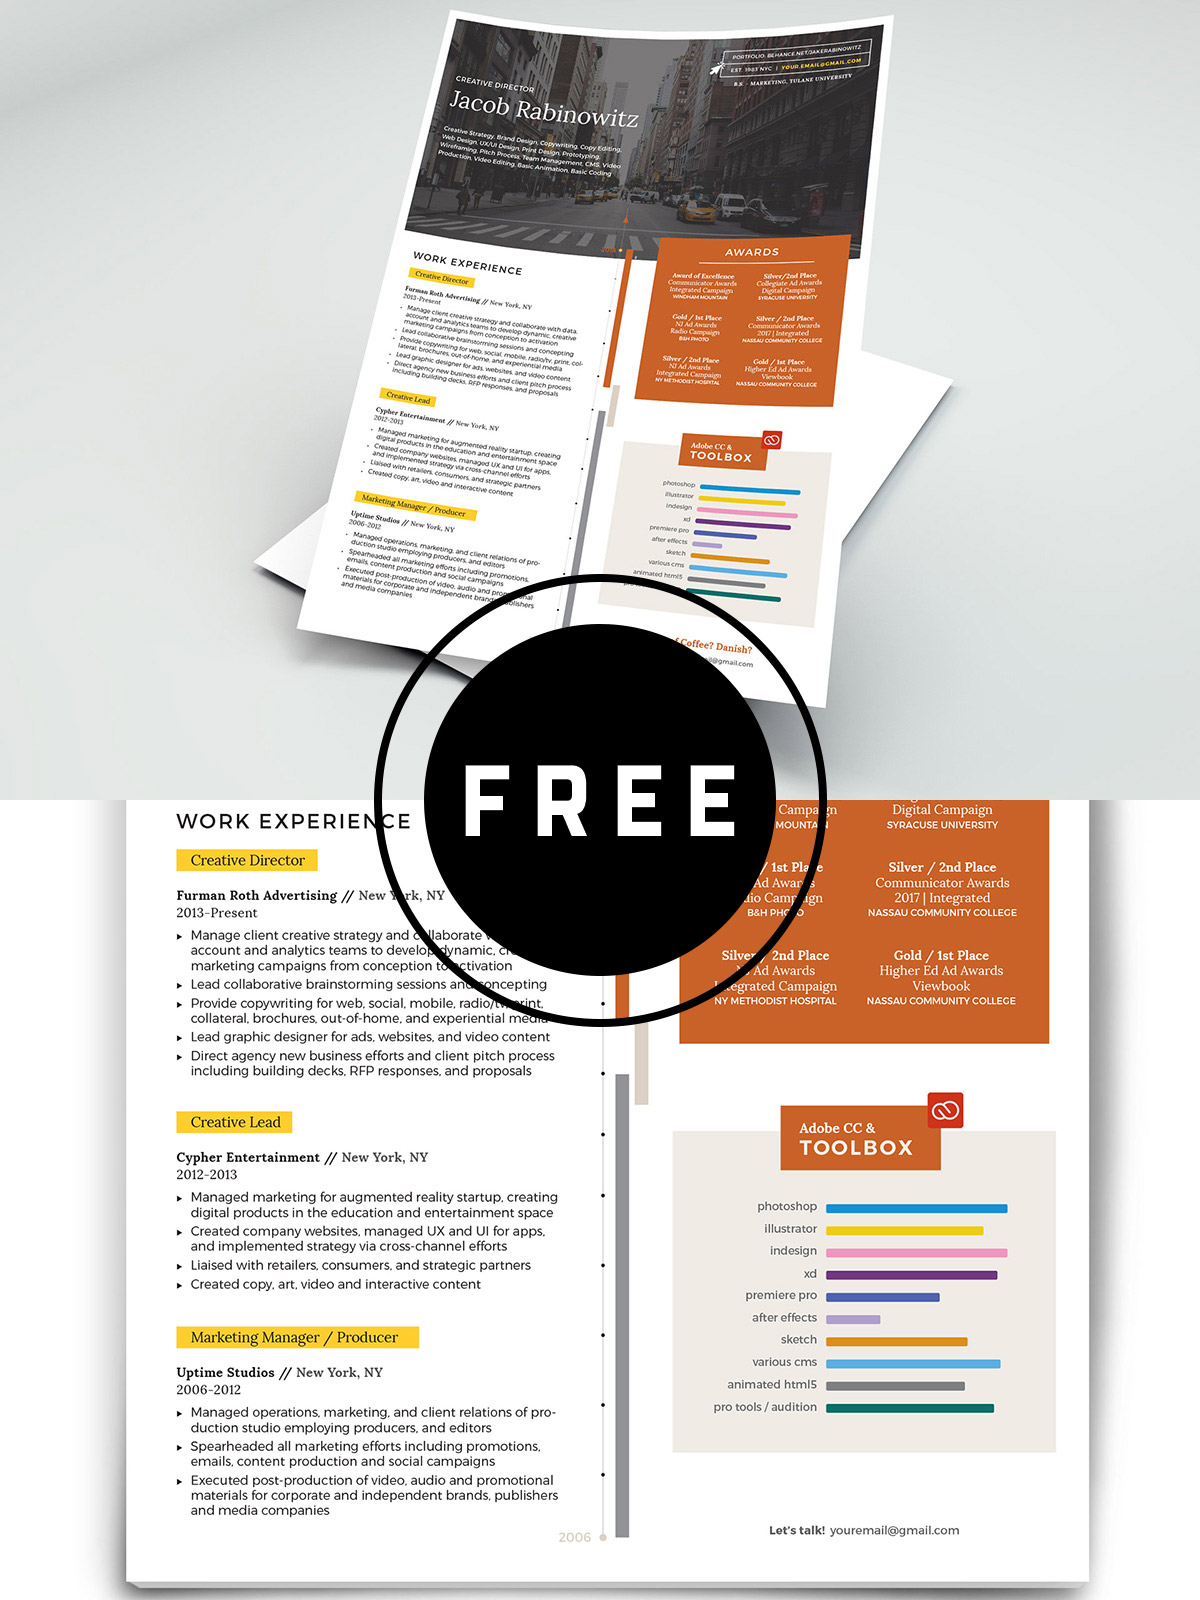 98 Awesome Free Resume Templates for 2019